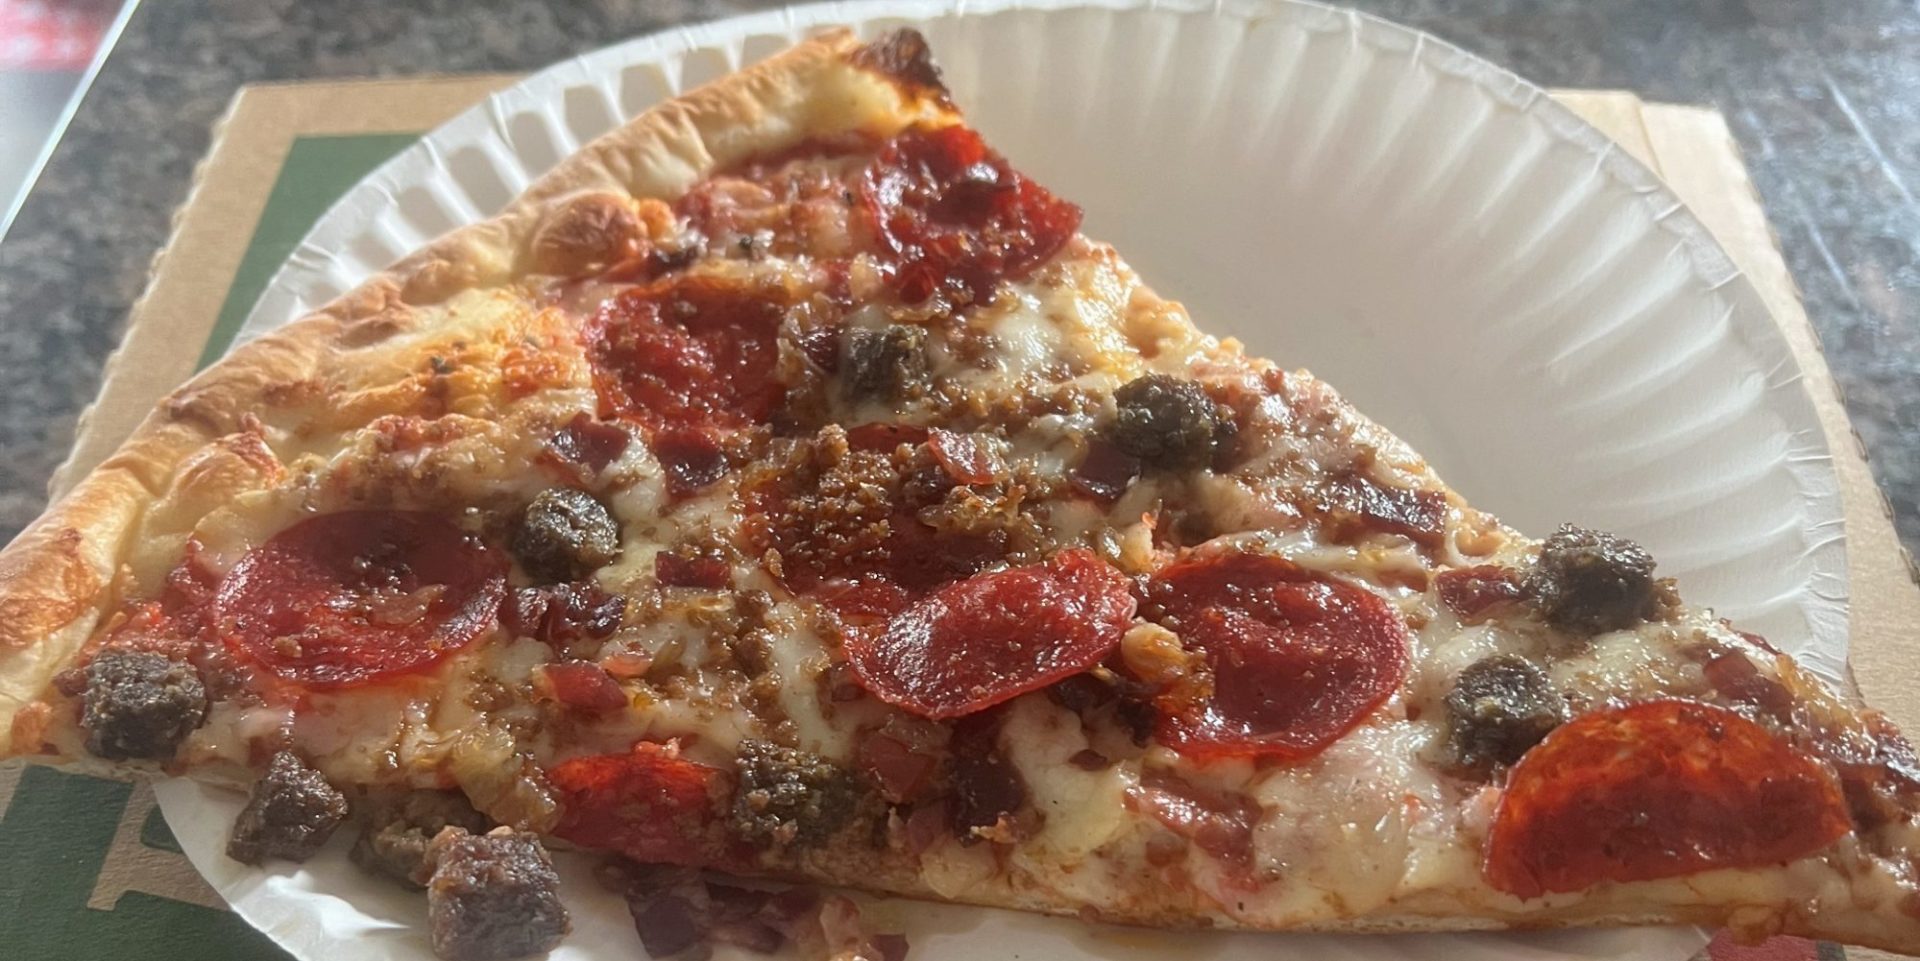 A single slice of meat lovers' pizza.